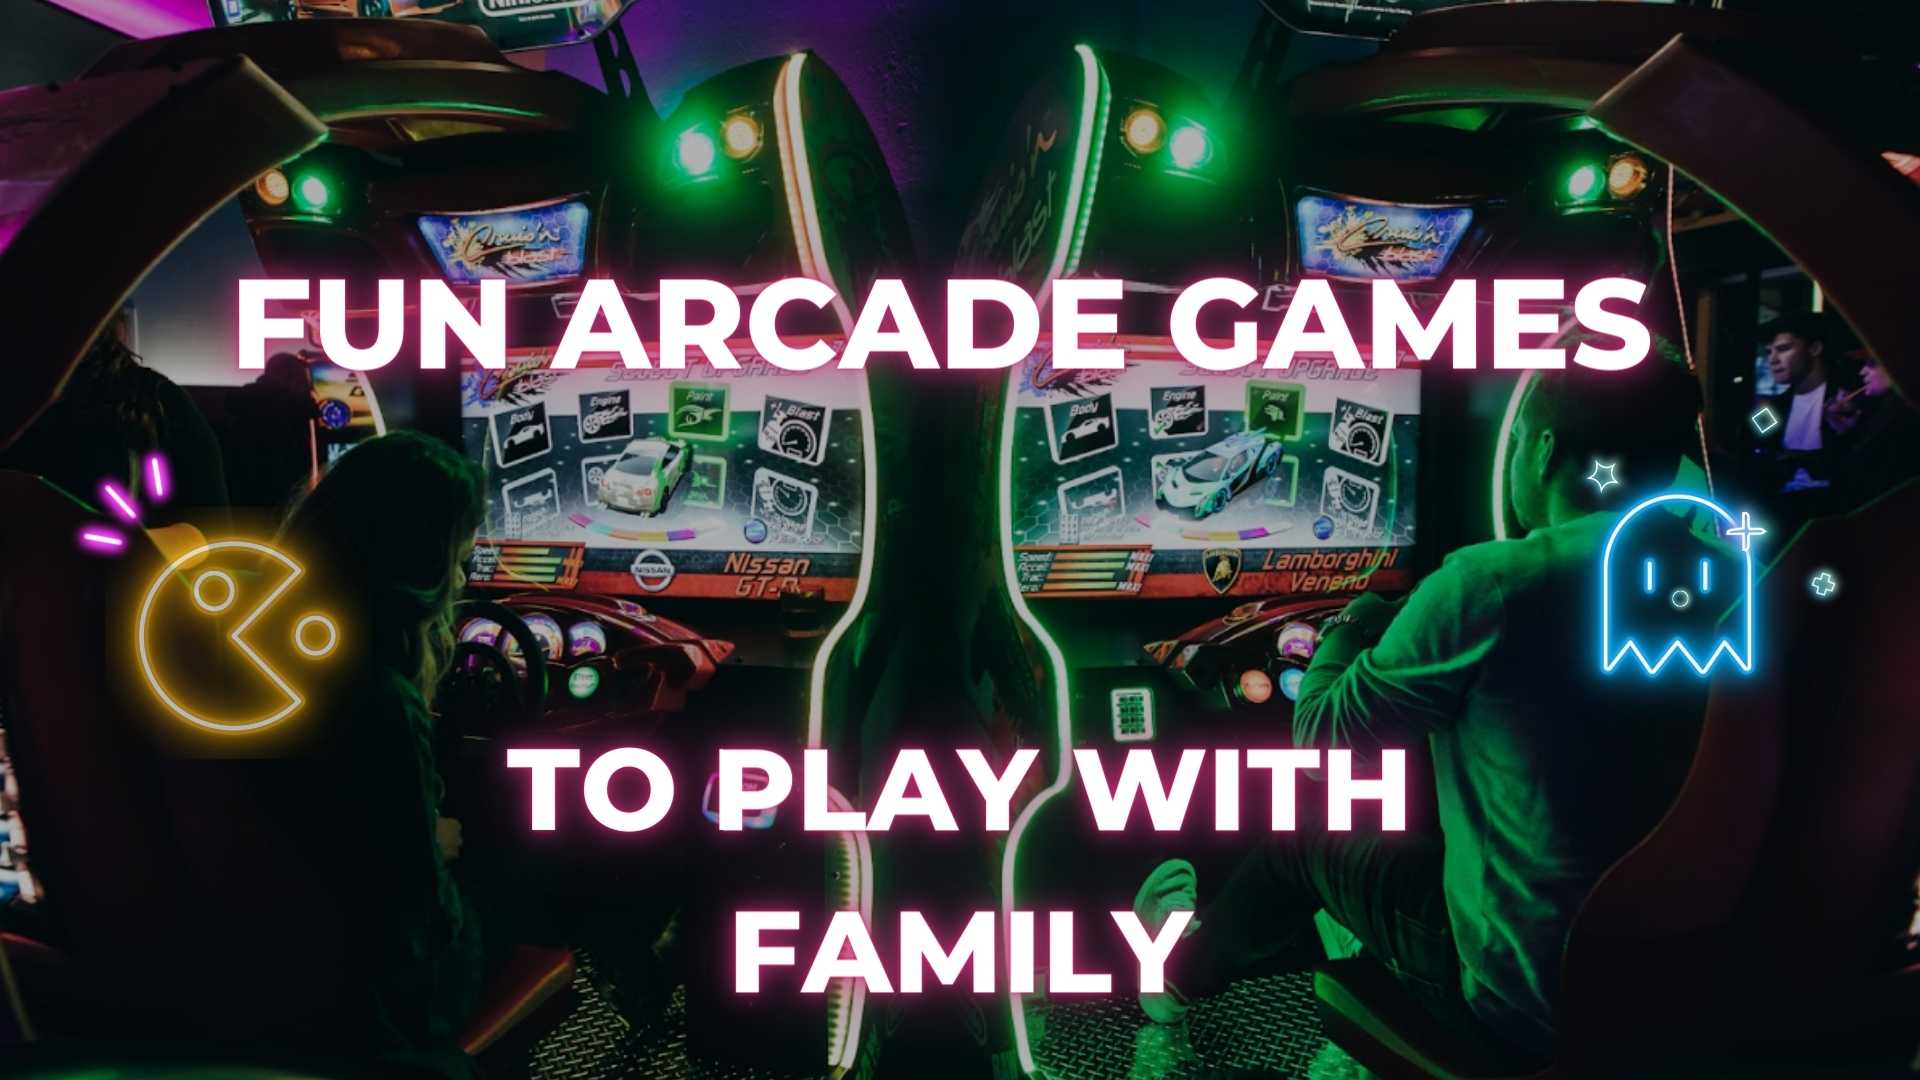 5 fun arcade games to play with family - Gamestate